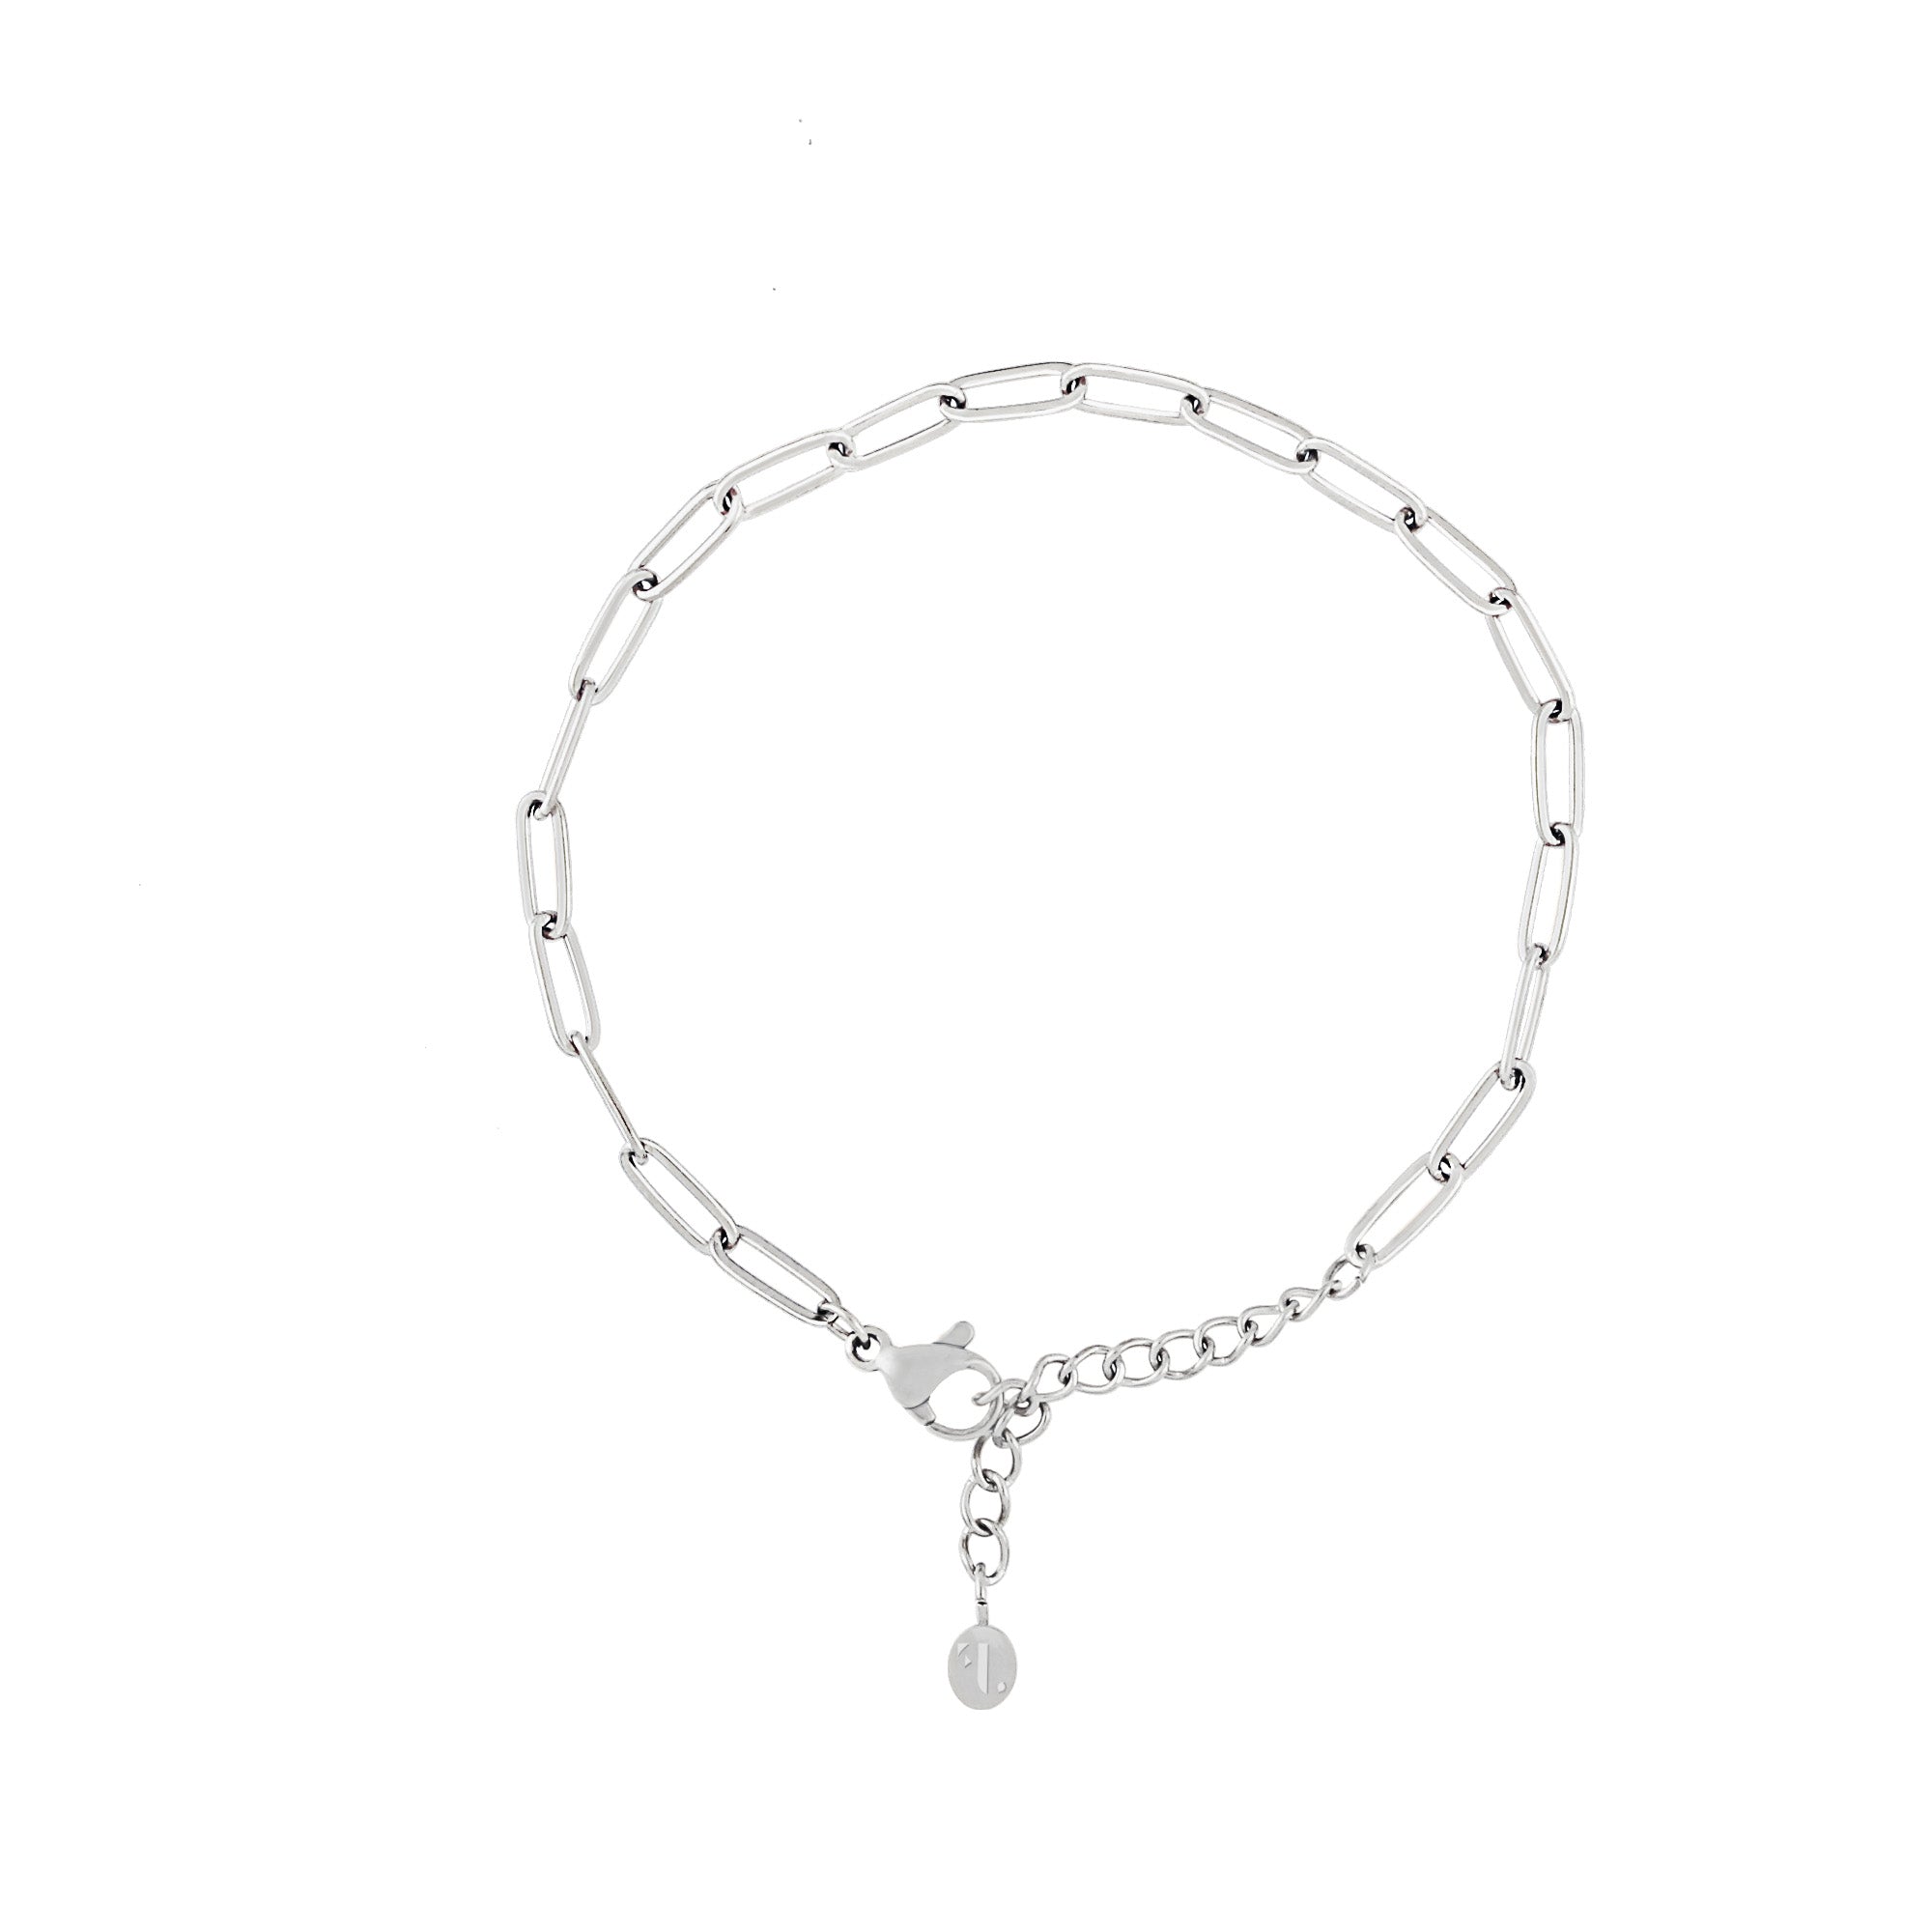 Maritsa bracelet by Five Jwlry for women, featuring an adjustable silver paperclip link chain ranging from 16cm to 20cm with its extension.